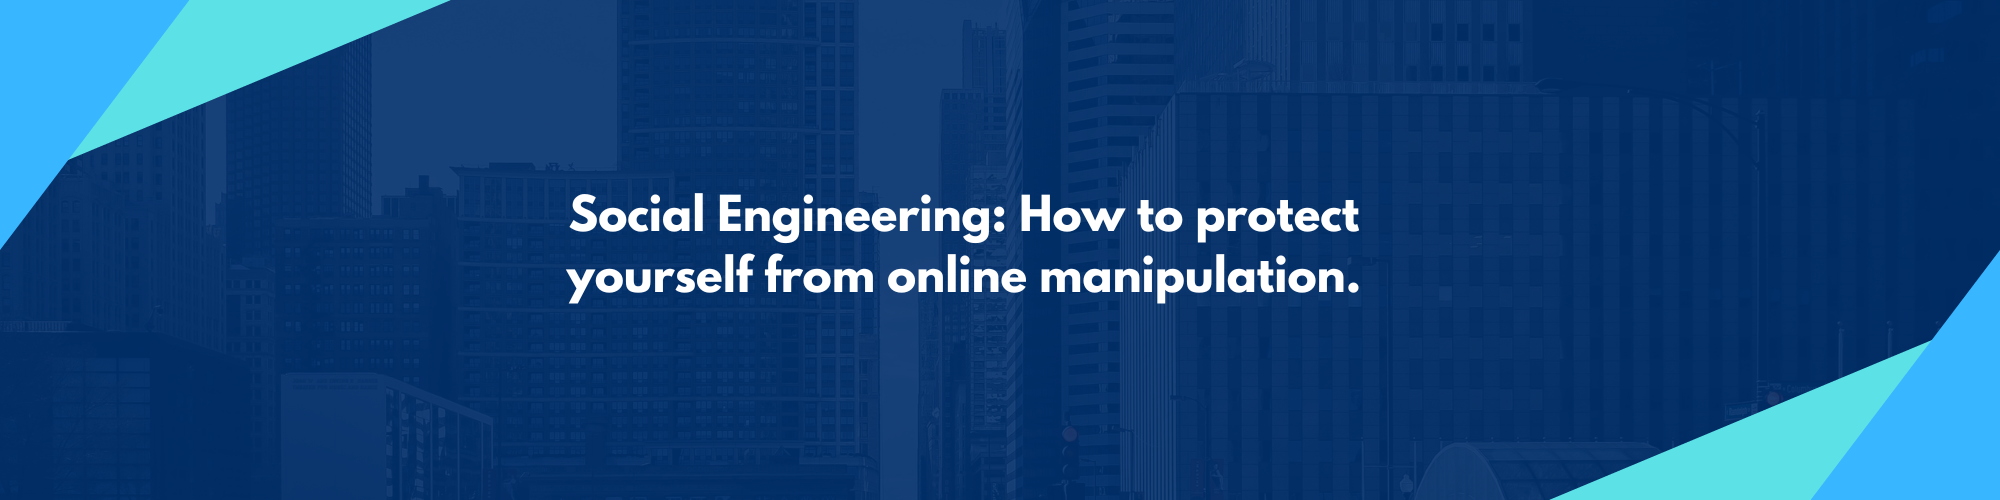 Social Engineering: How to protect yourself from online manipulation.